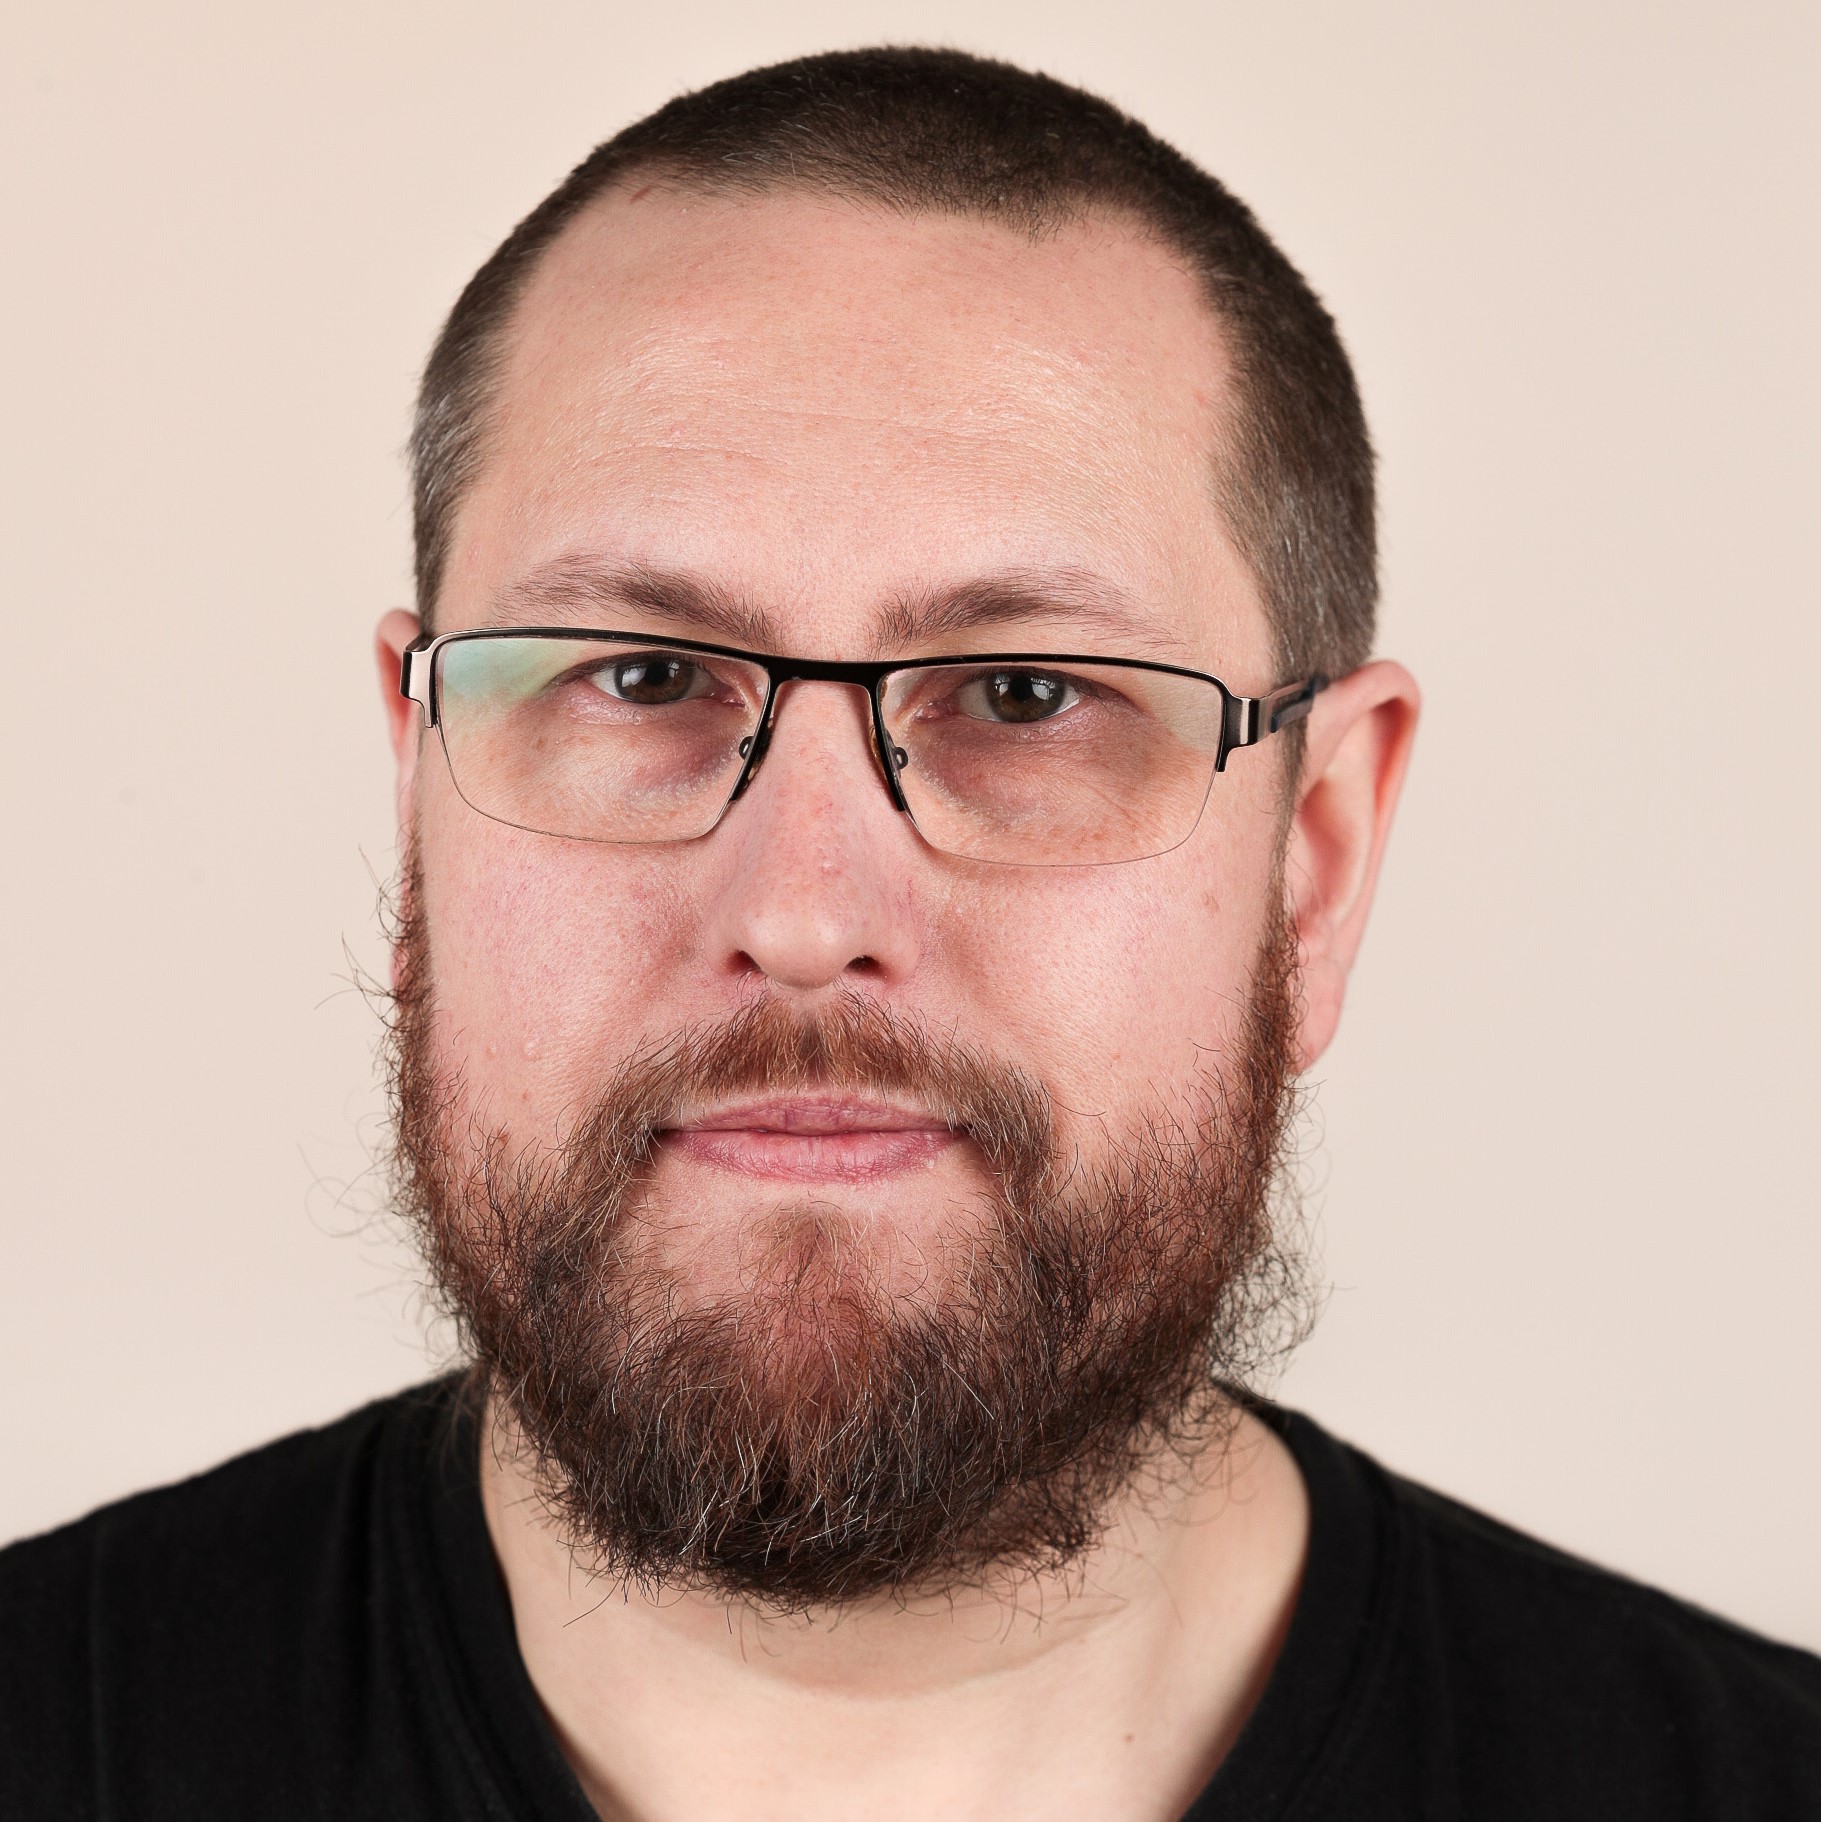 A man with a dark buzzcut and a dark beard flecked with grey, wearing rectangular glasses, looks into the camera.